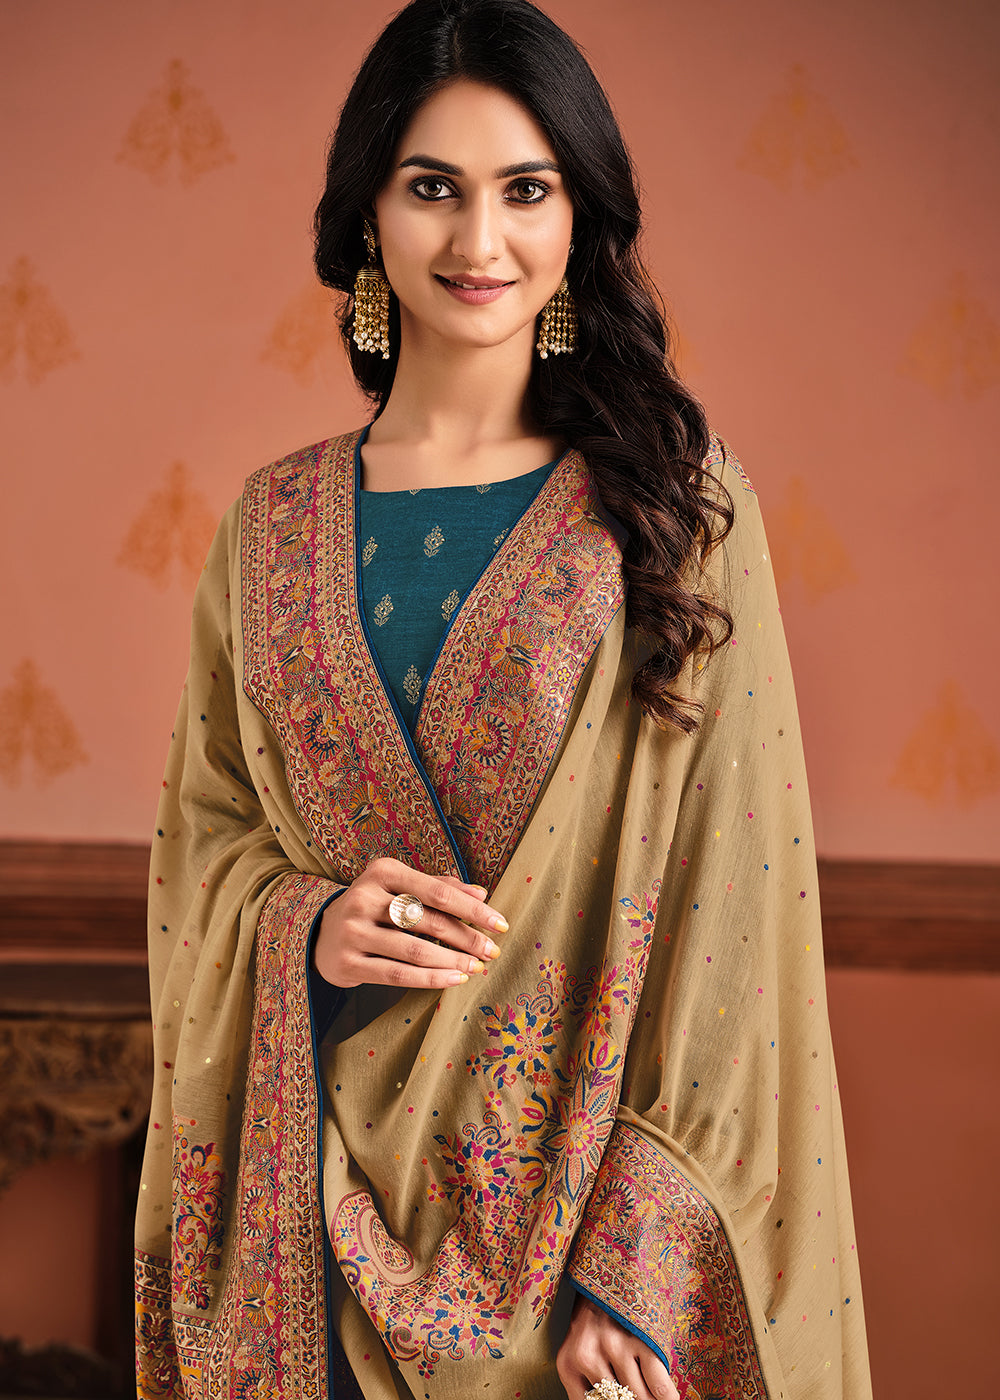 Buy Now Teal & Beige Silk Jacquard Sangeet Wear Pant Style Salwar Suit Online in USA, UK, Canada & Worldwide at Empress Clothing.